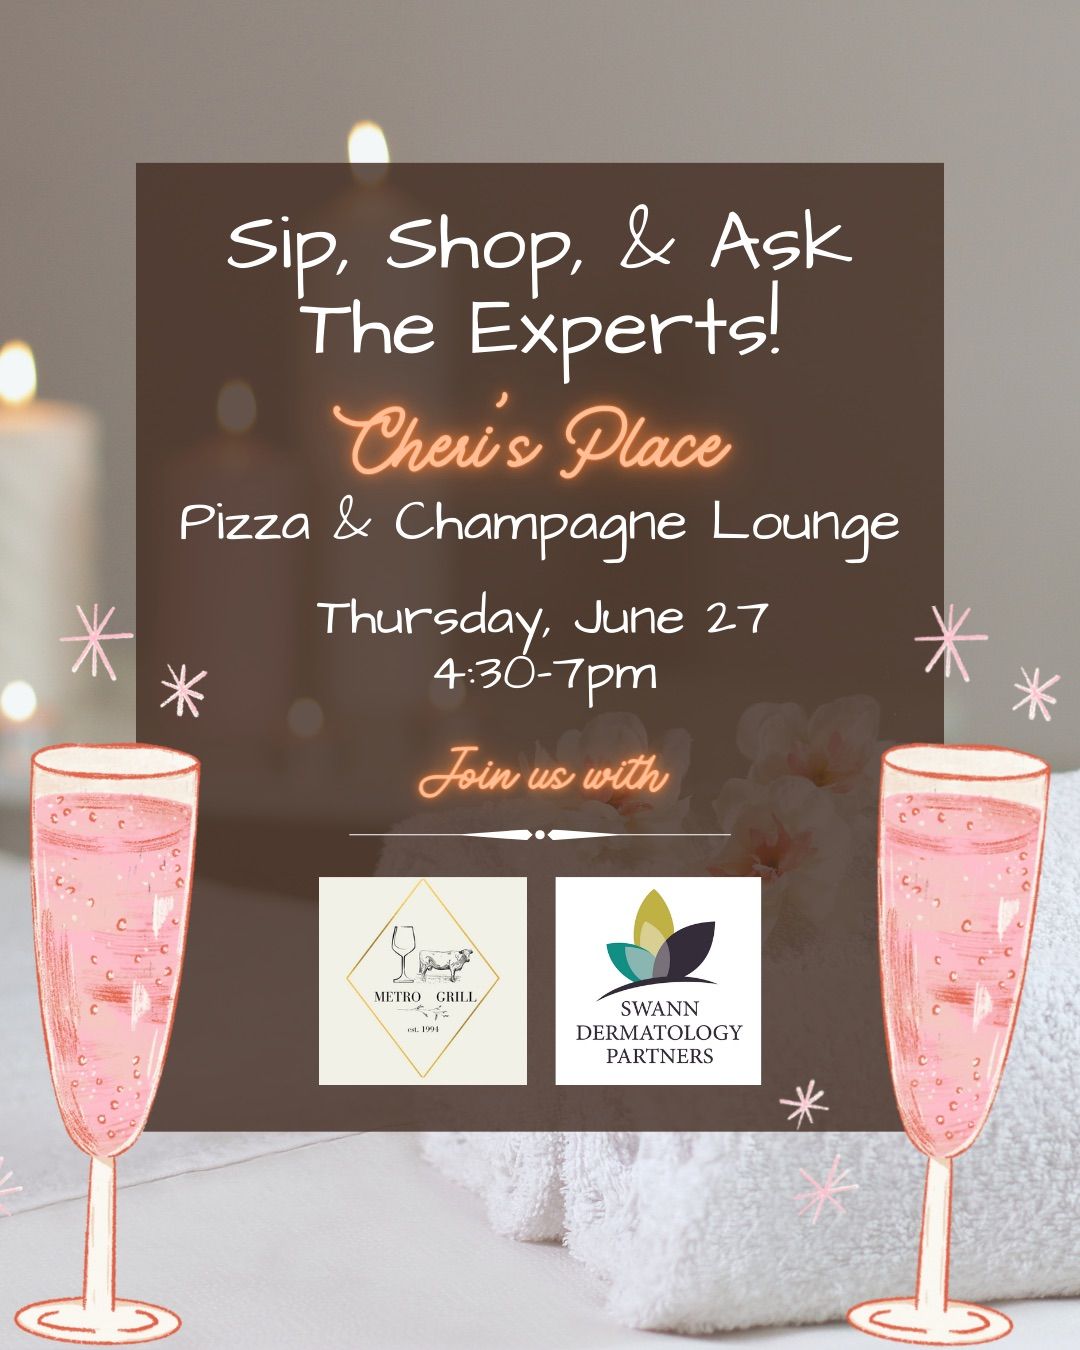 Sip, Shop, & Ask The Experts 